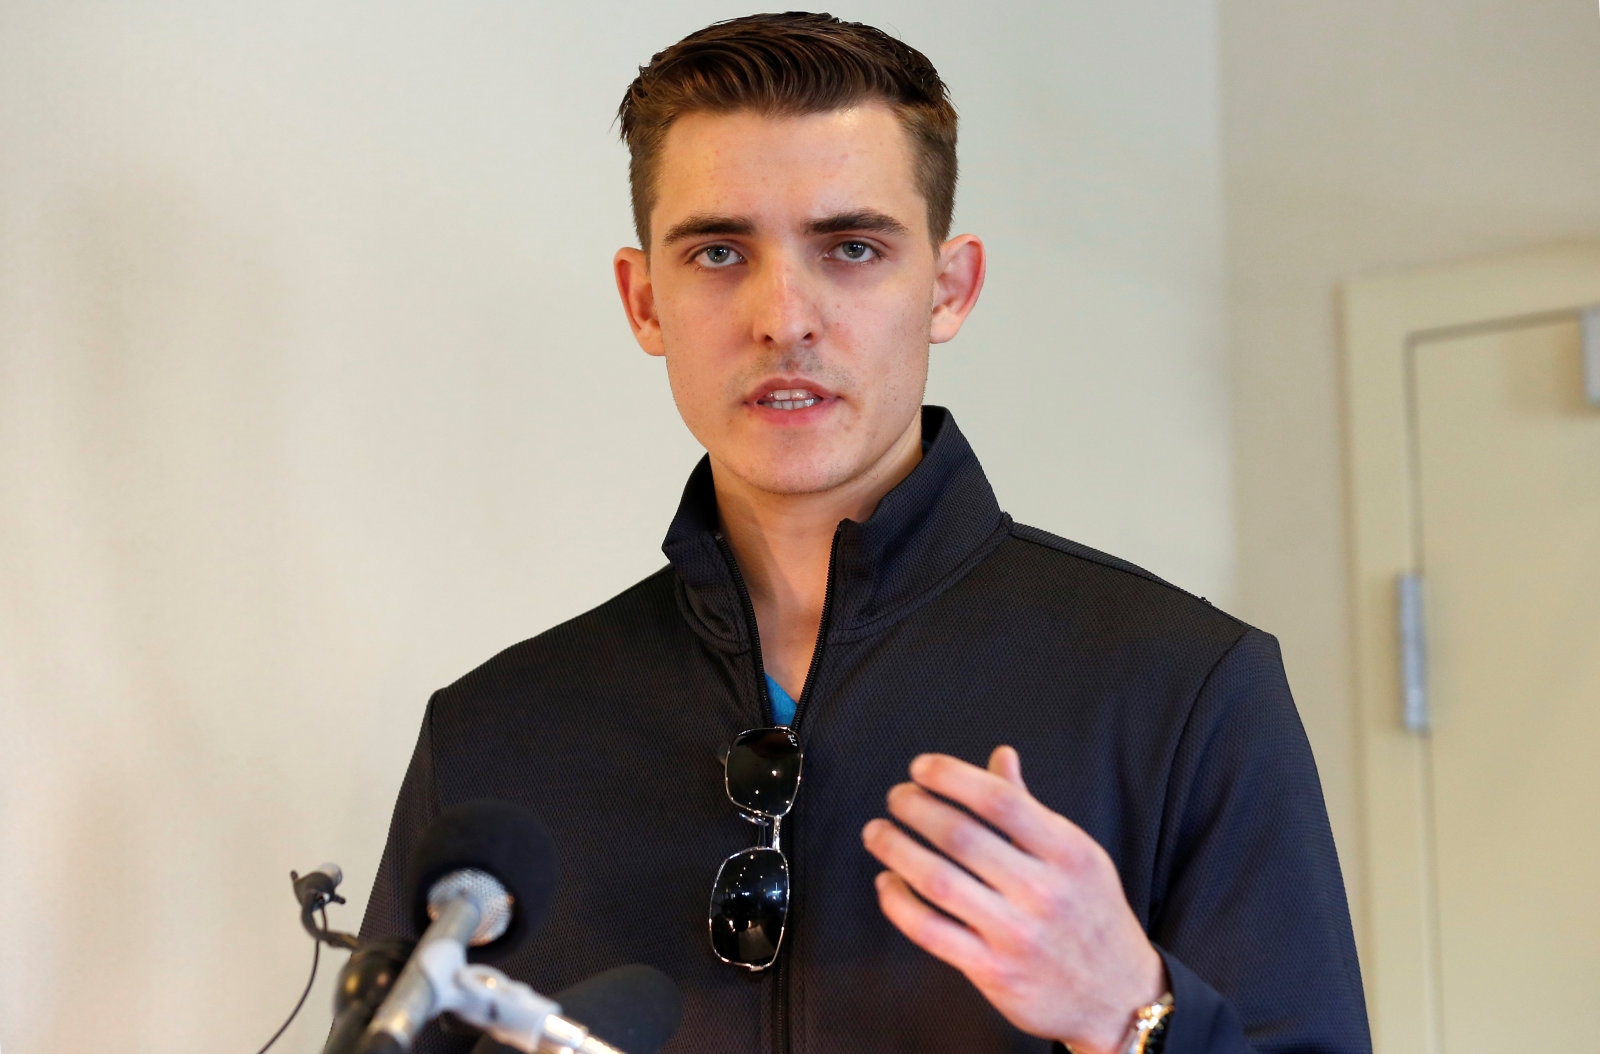 Twitter bans right-wing activist Jacob Wohl over fake accounts | DeviceDaily.com